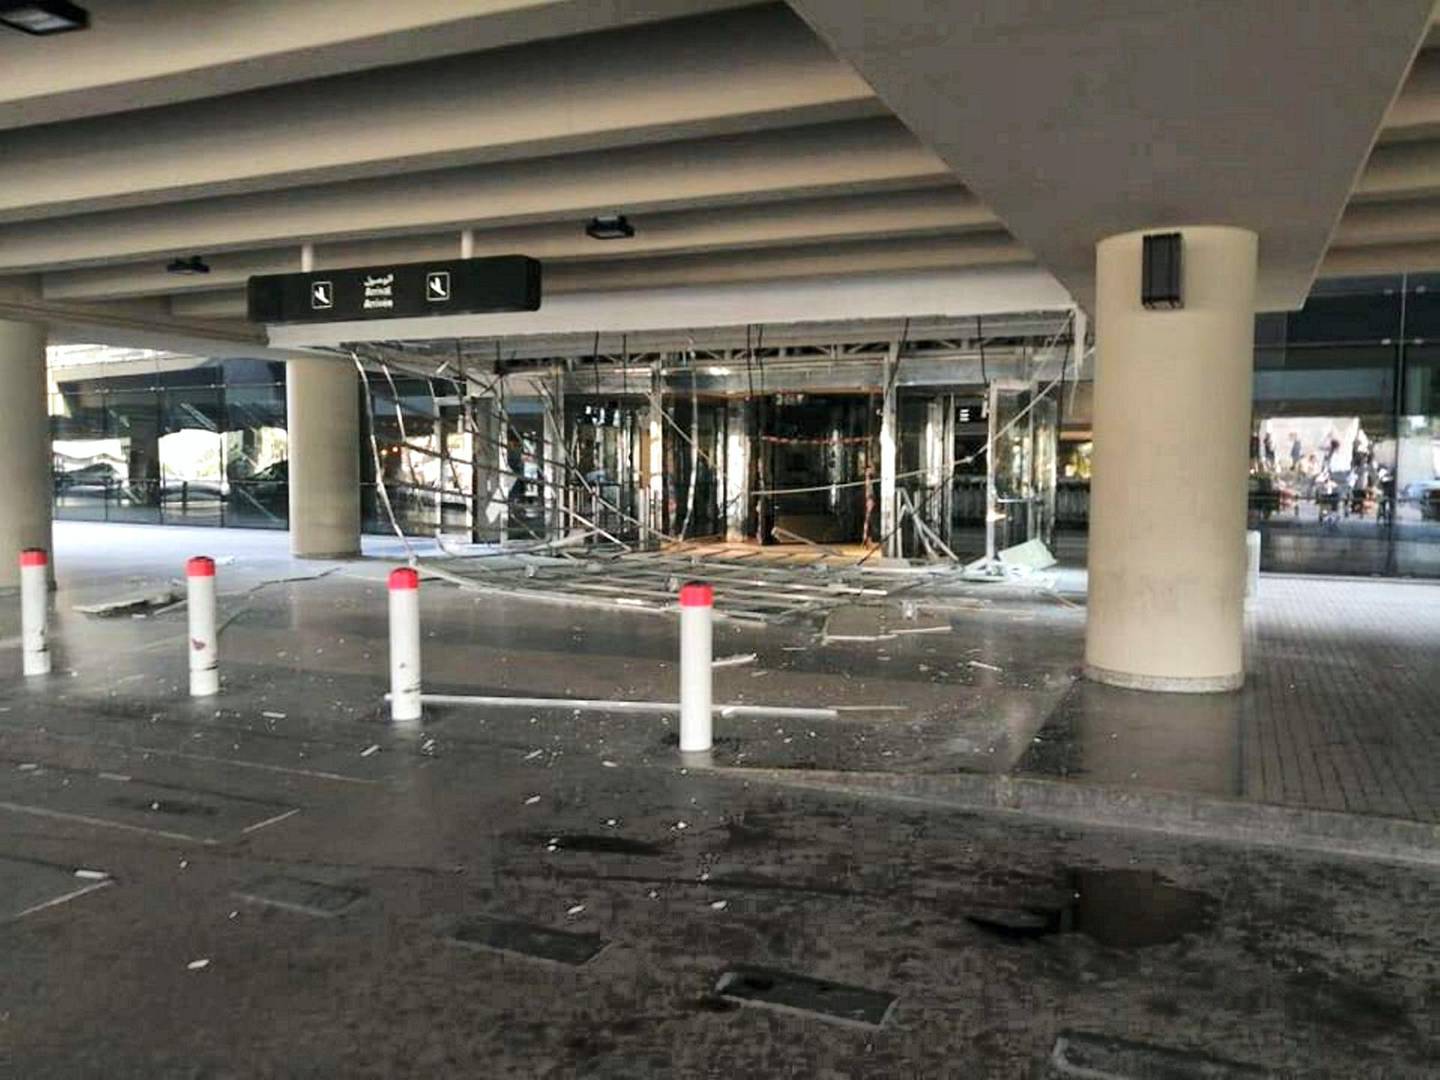 This photograph shows damage at Beirut airport as a result of the explosion about 10km away. Courtesy Lebanese Plane Spotters / Facebook